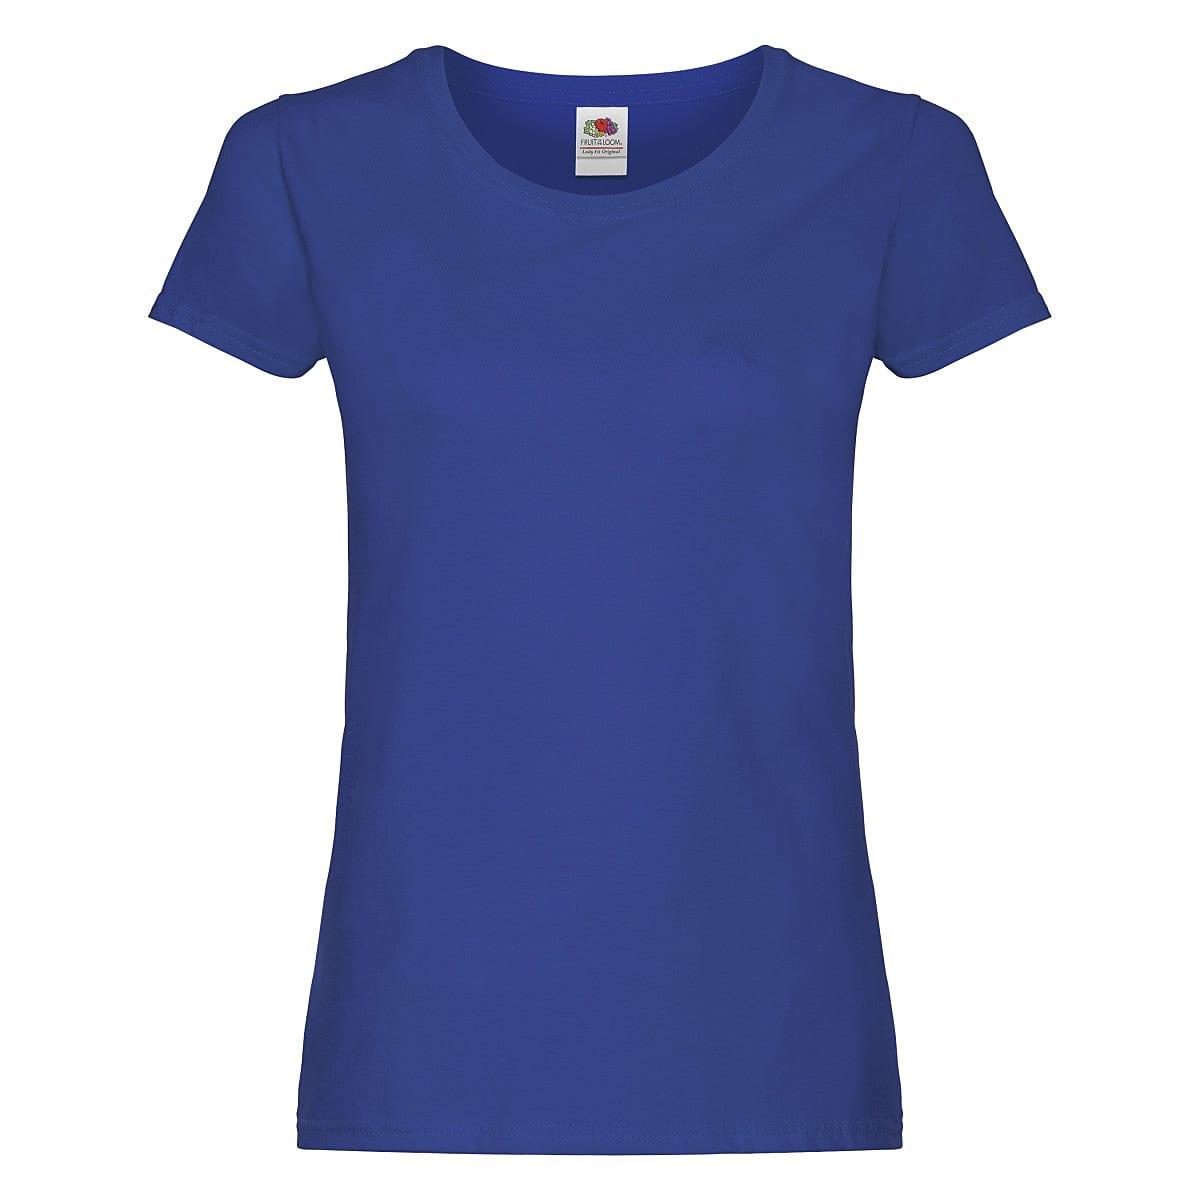 Fruit Of The Loom Lady Fit Original T-Shirt in Royal Blue (Product Code: 61420)